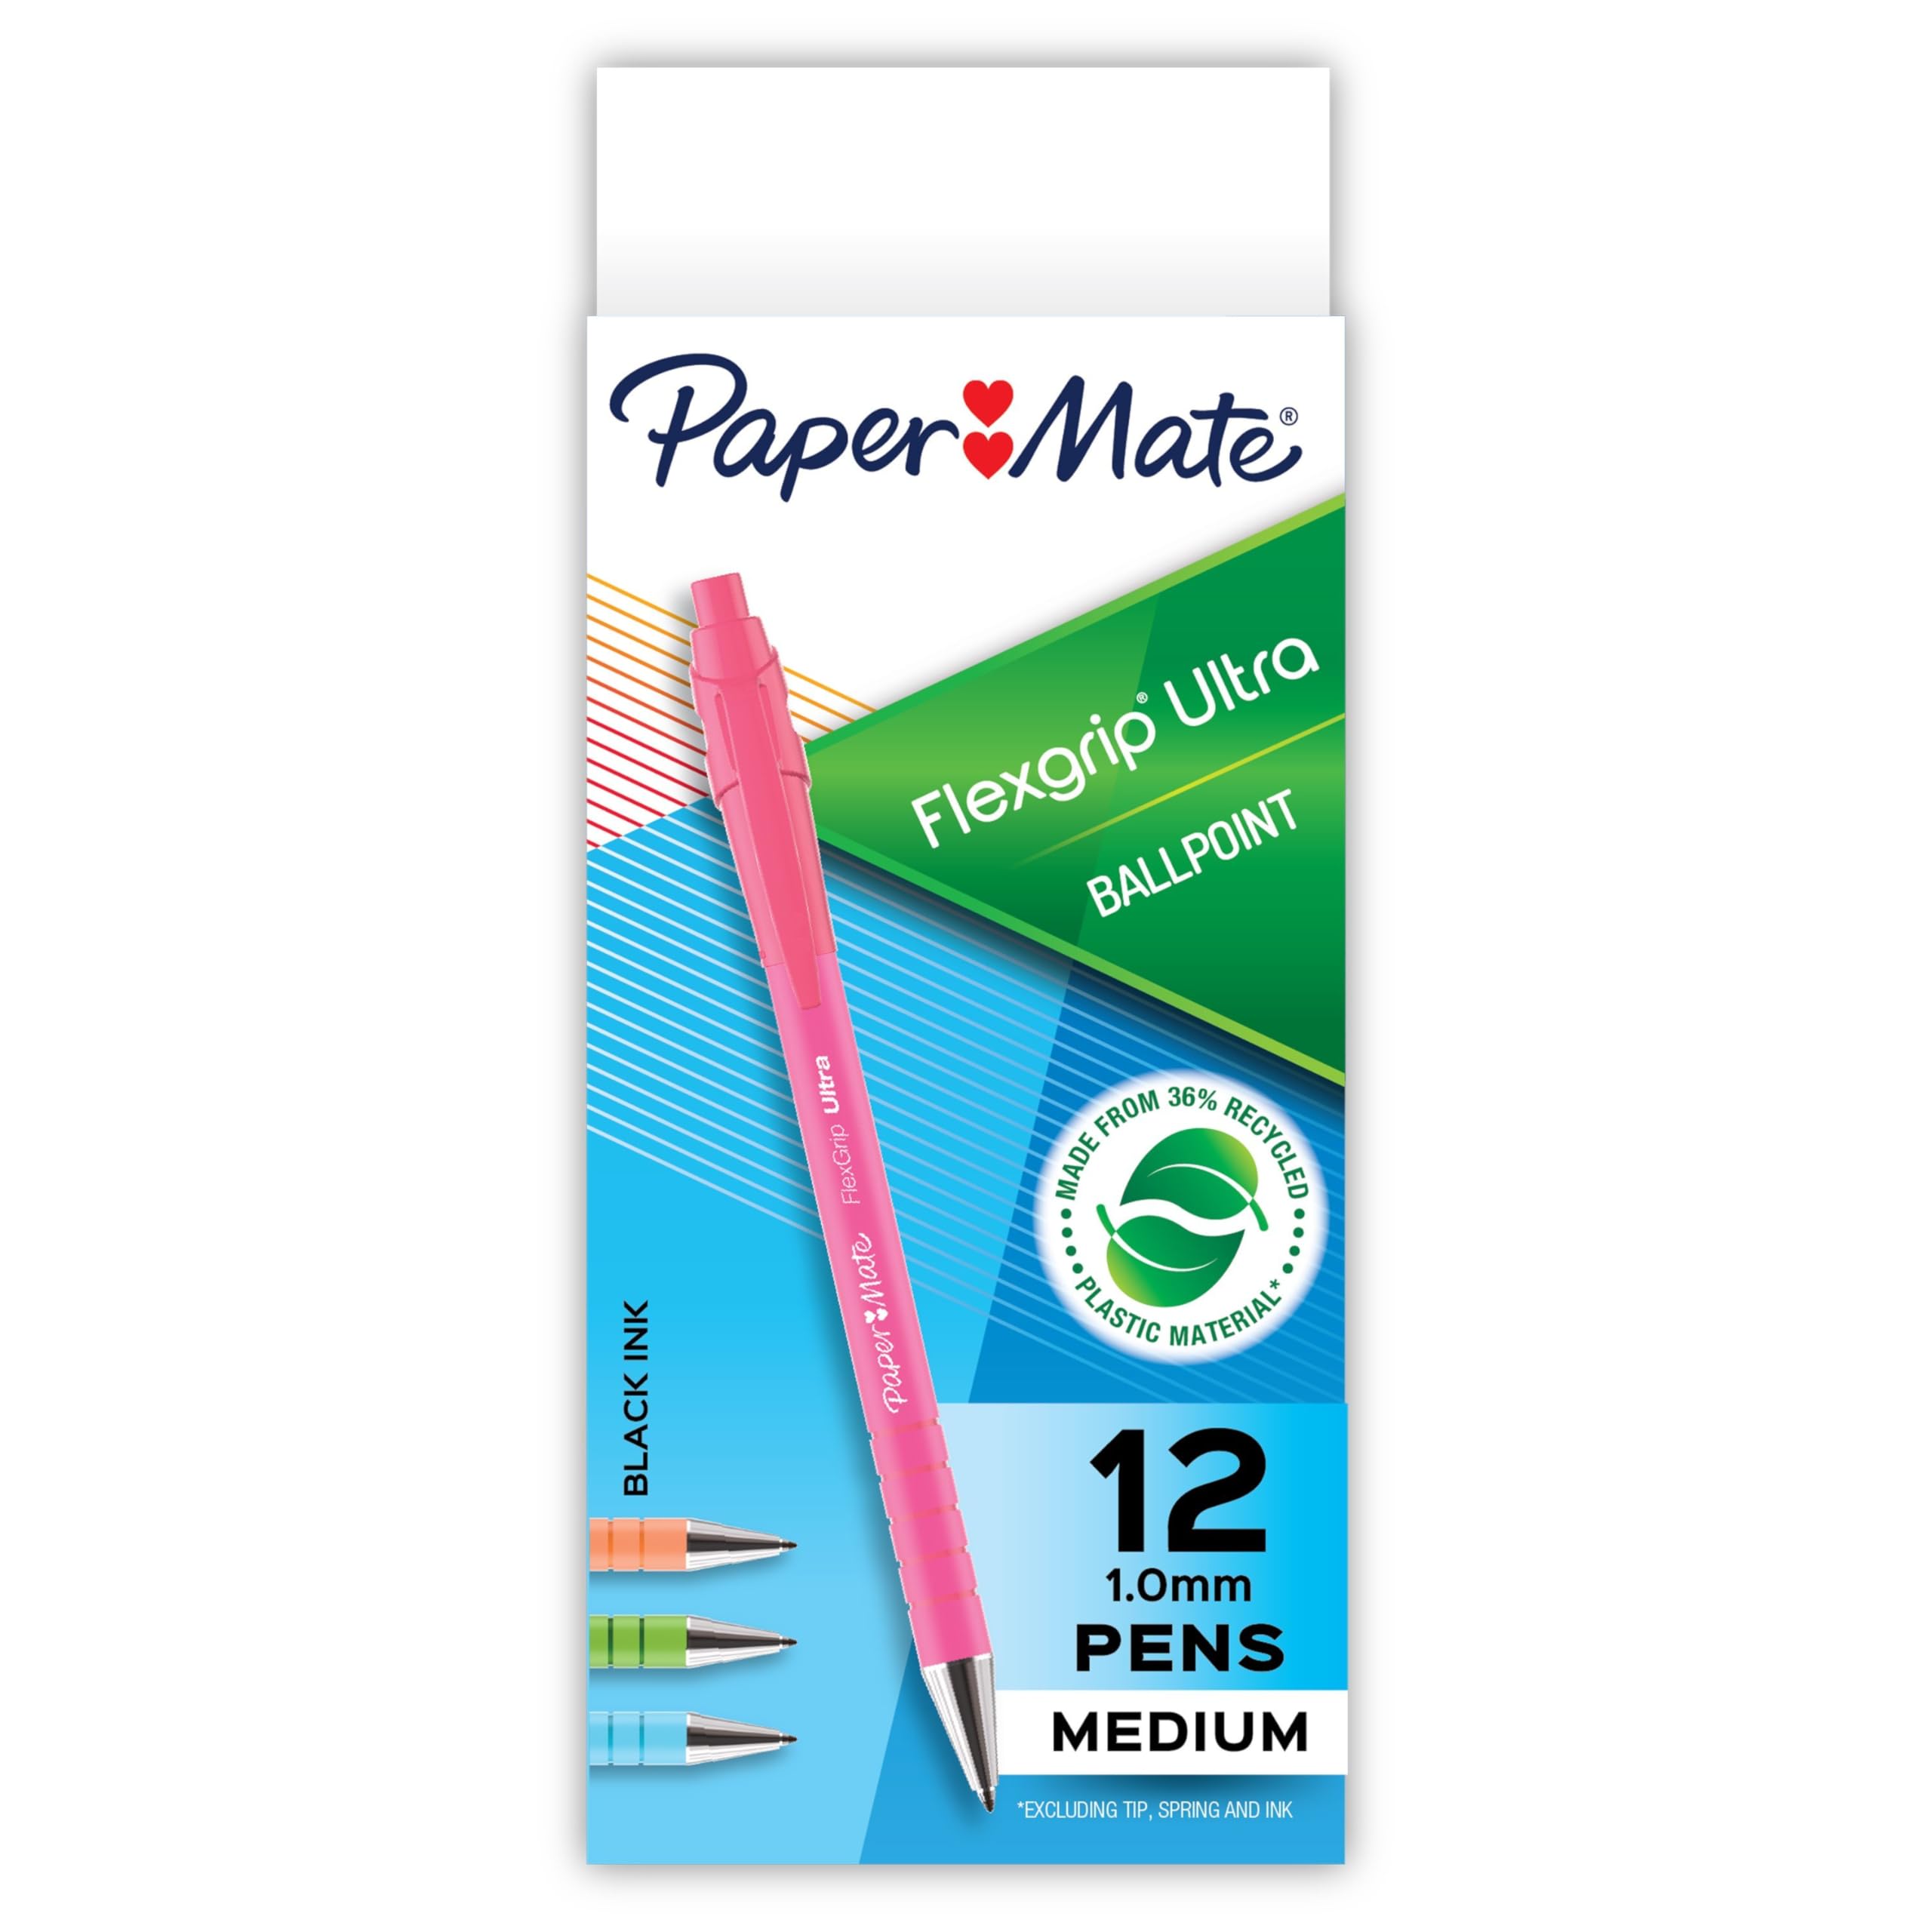 12-Count Paper Mate FlexGrip Ultra Ballpoint Pens (1.0mm Medium Point, Black Ink, Assorted Barrel Colors) $7.60 w/ S&S + Free Shipping w/ Prime or on orders over $35